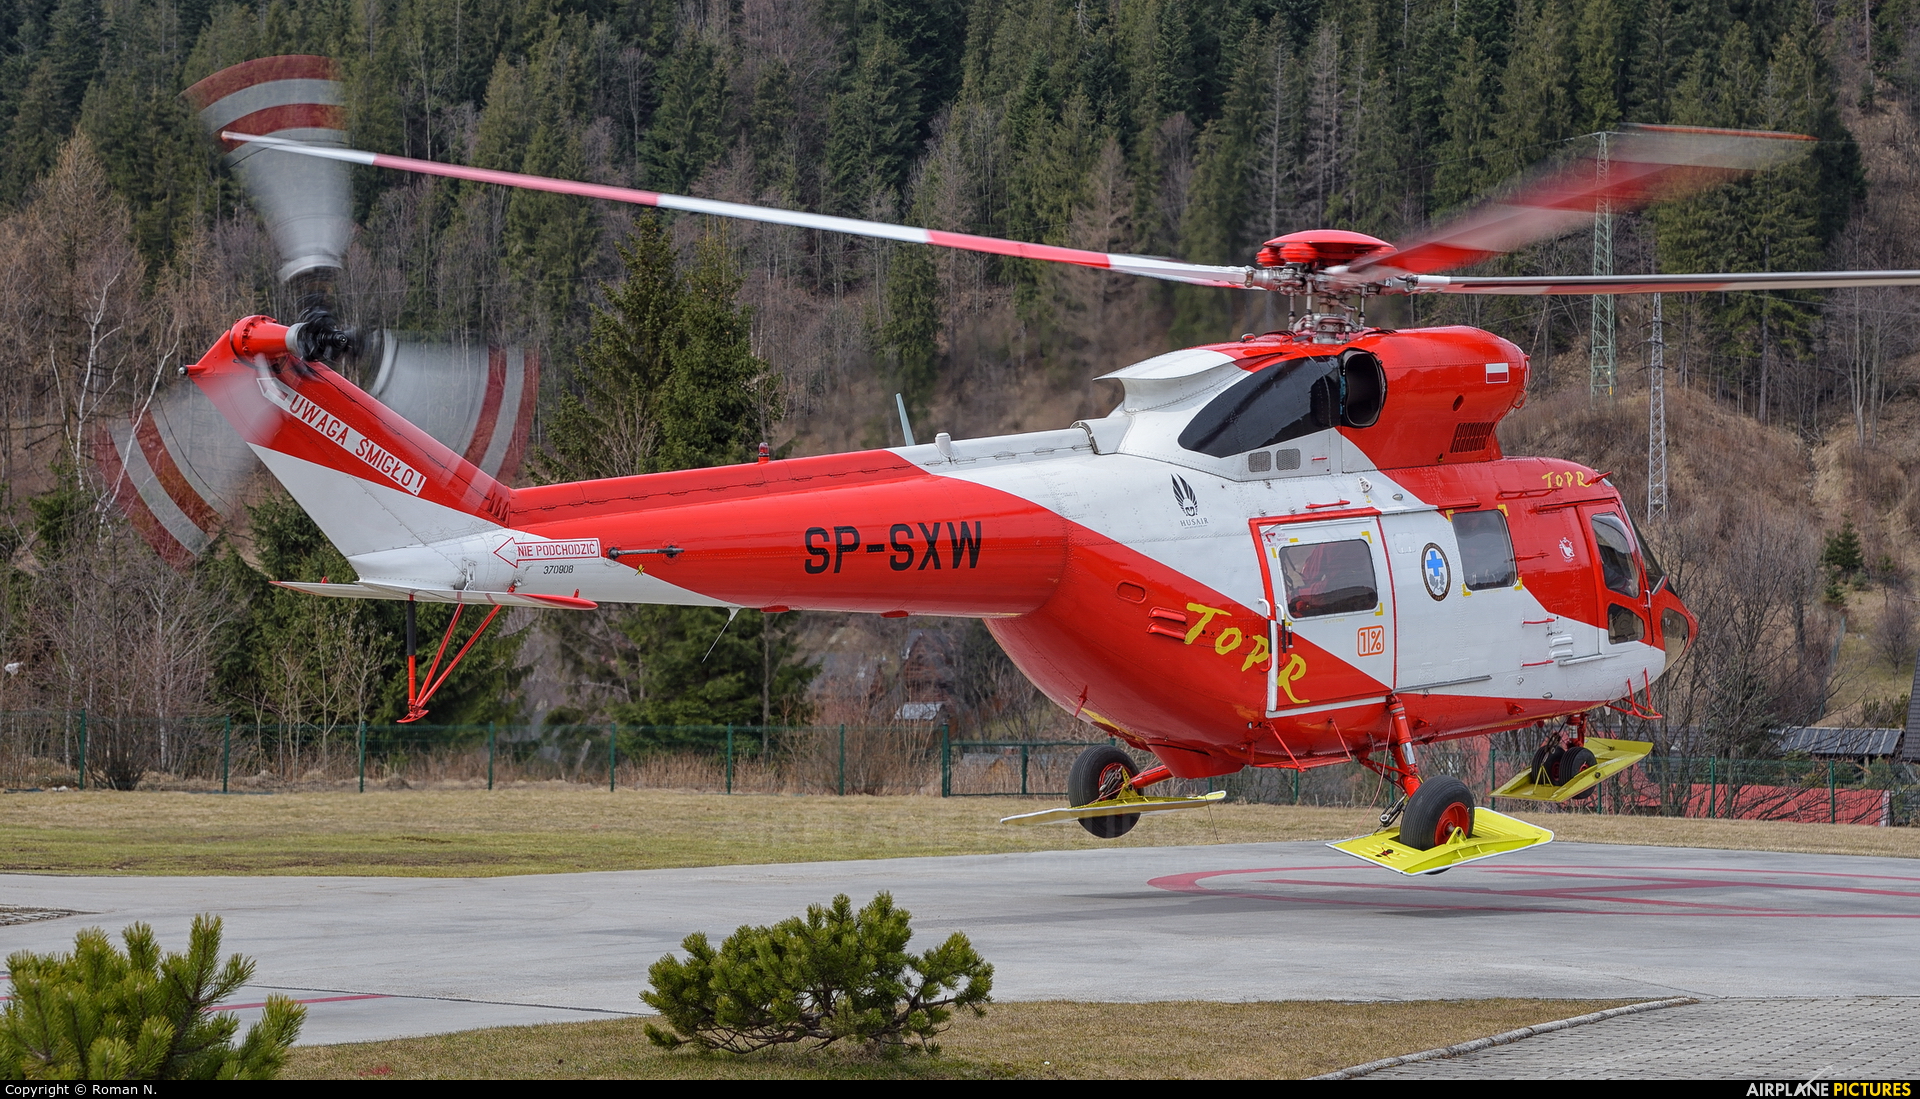 Tatra Mountains Rescue (TOPR) SP-SXW aircraft at Off Airport - Poland